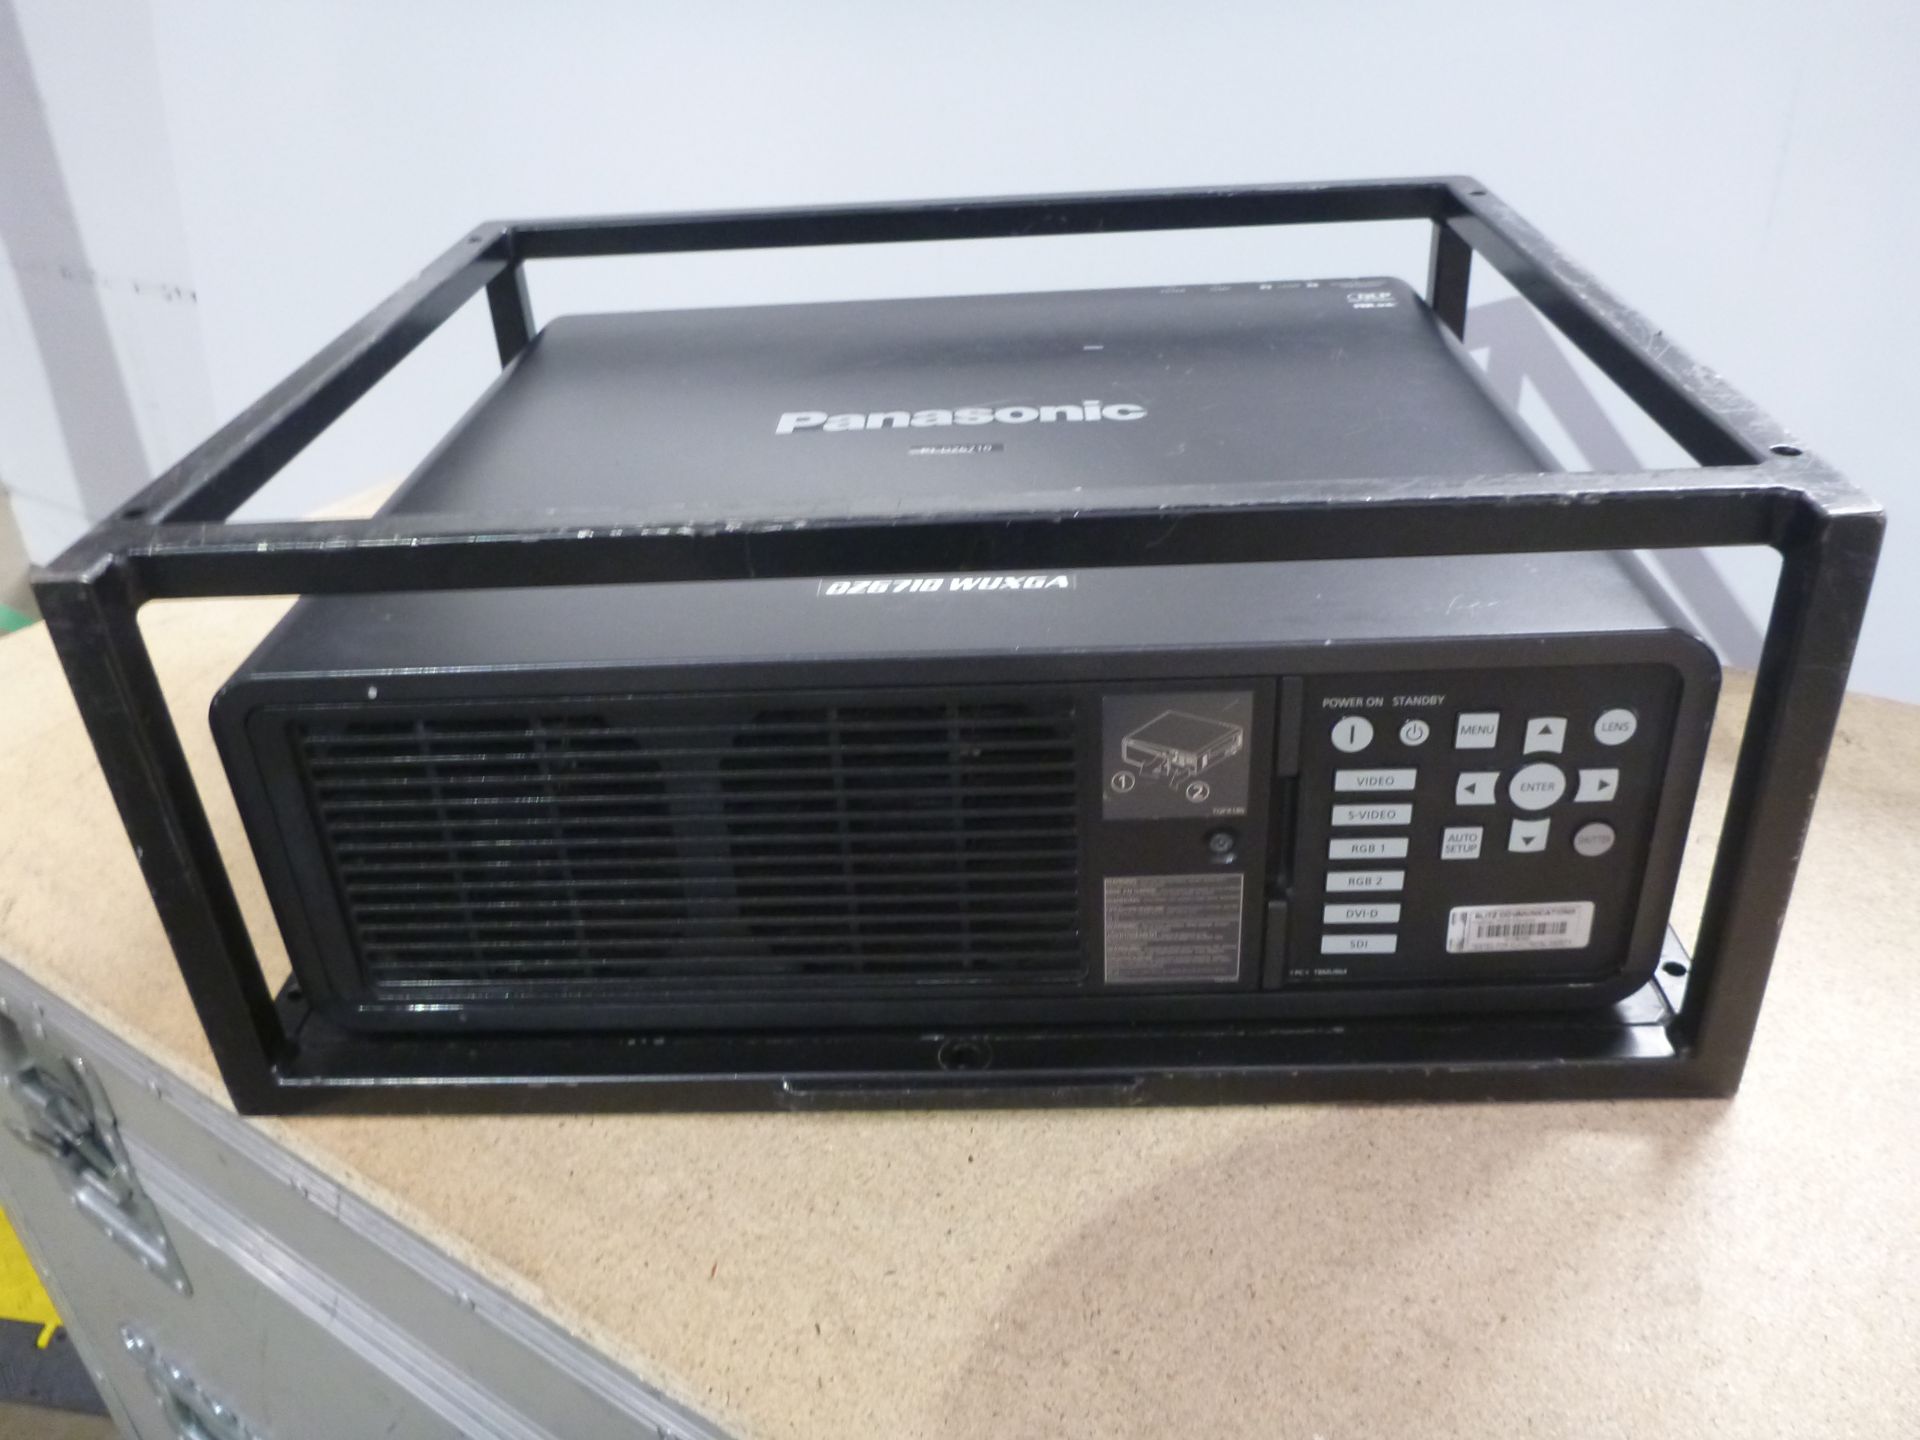 Panasonic Projector, Model PT-DZ6710E, S/N SH0150015, YOM 2010, In flight case with standard 1.3-1. - Image 3 of 13